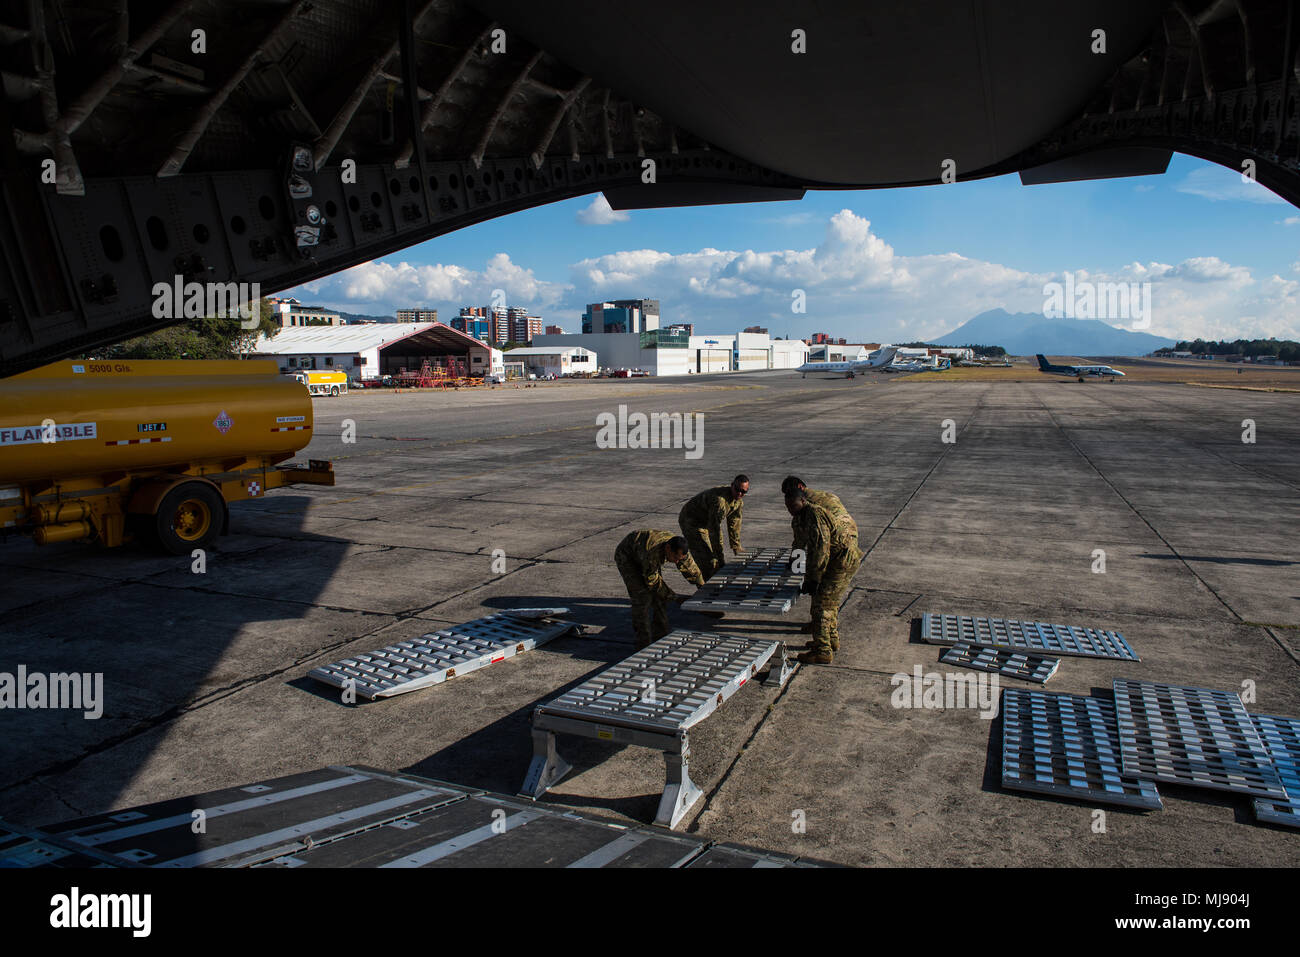 U.S. Airmen with the 21st Airlift Squadron put together a ramp in order to deliver Denton Program emergency response vehicles at La Aurora International Airport, Guatemala City, Guatemala, April 20, 2018. The Denton Program is a Department of Defense transportation program that moves humanitarian cargo, donated by U.S. based Non-Governmental Organizations to developing nations to ease human suffering. The emergency vehicles were donated by the Mission of Love Foundation, they are the largest user of the Denton Program, having delivered medical, relief and humanitarian supplies to needy communi Stock Photo